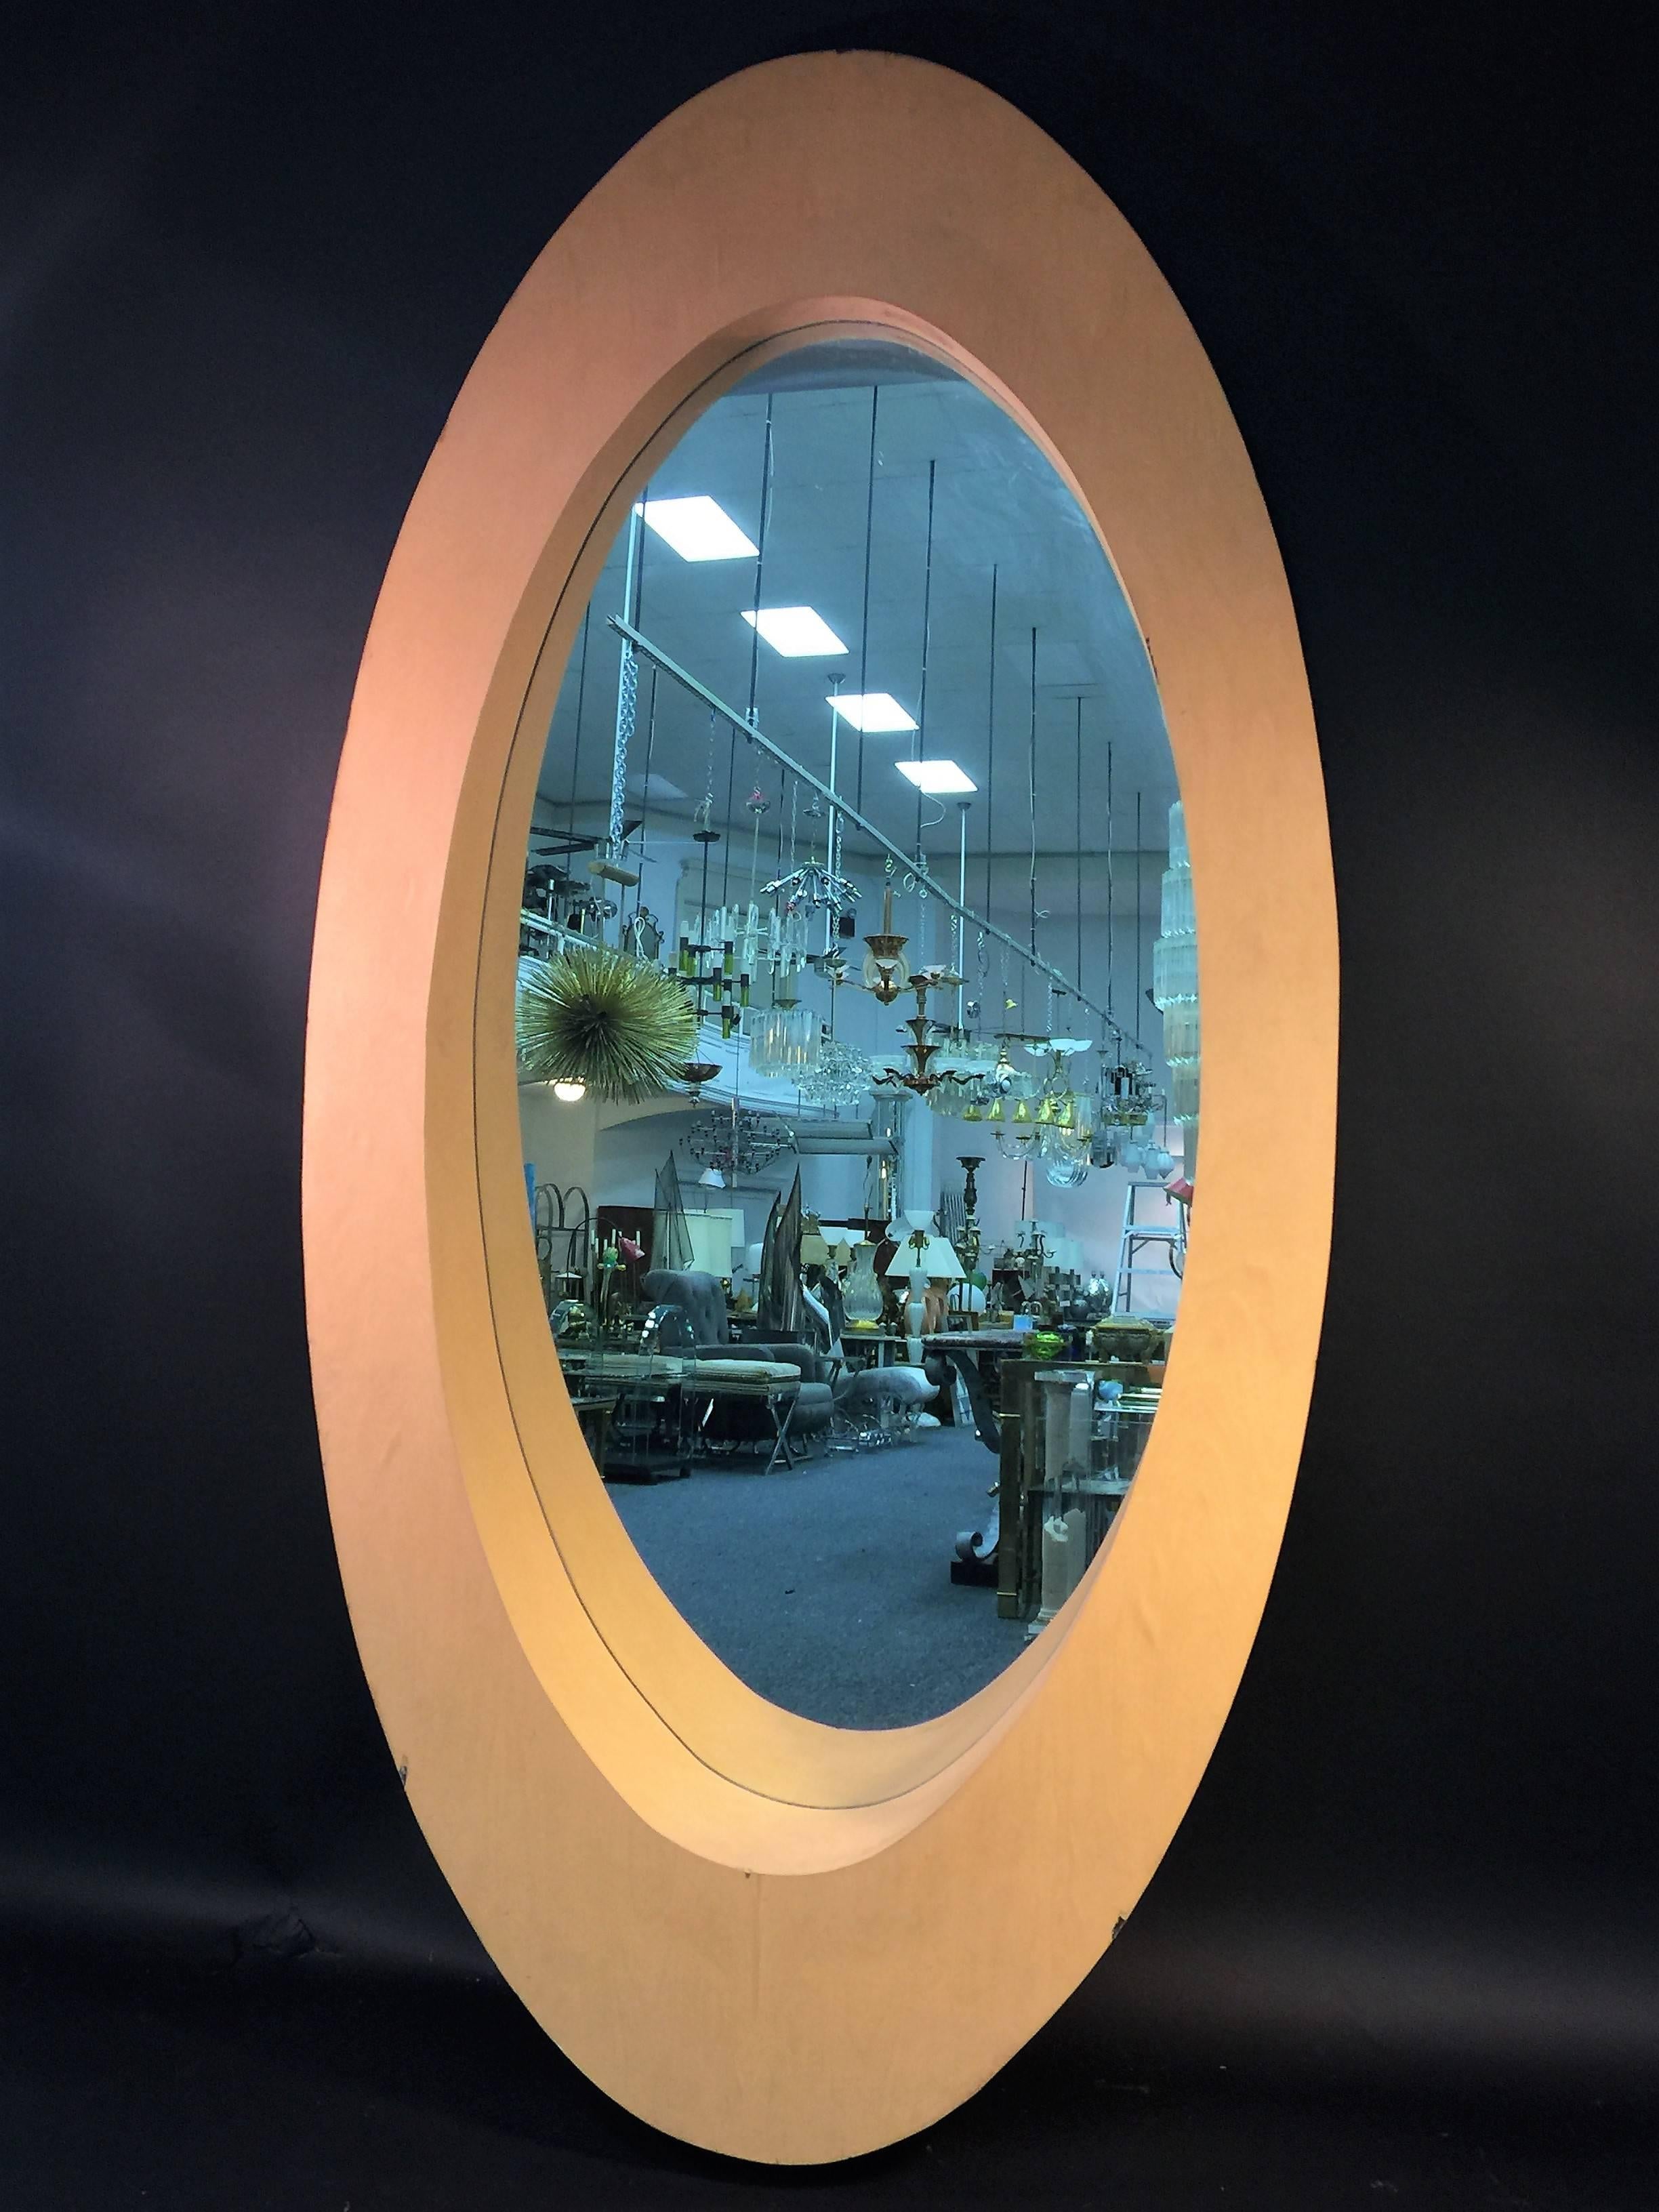 Great pair of mod wood mirrors in a ovoid shape tapering from thinner to wider. Incredibly well constructed and solid, these would be fantastic on a large wall with a great painting in the center and double consoles underneath. The top depth is 4